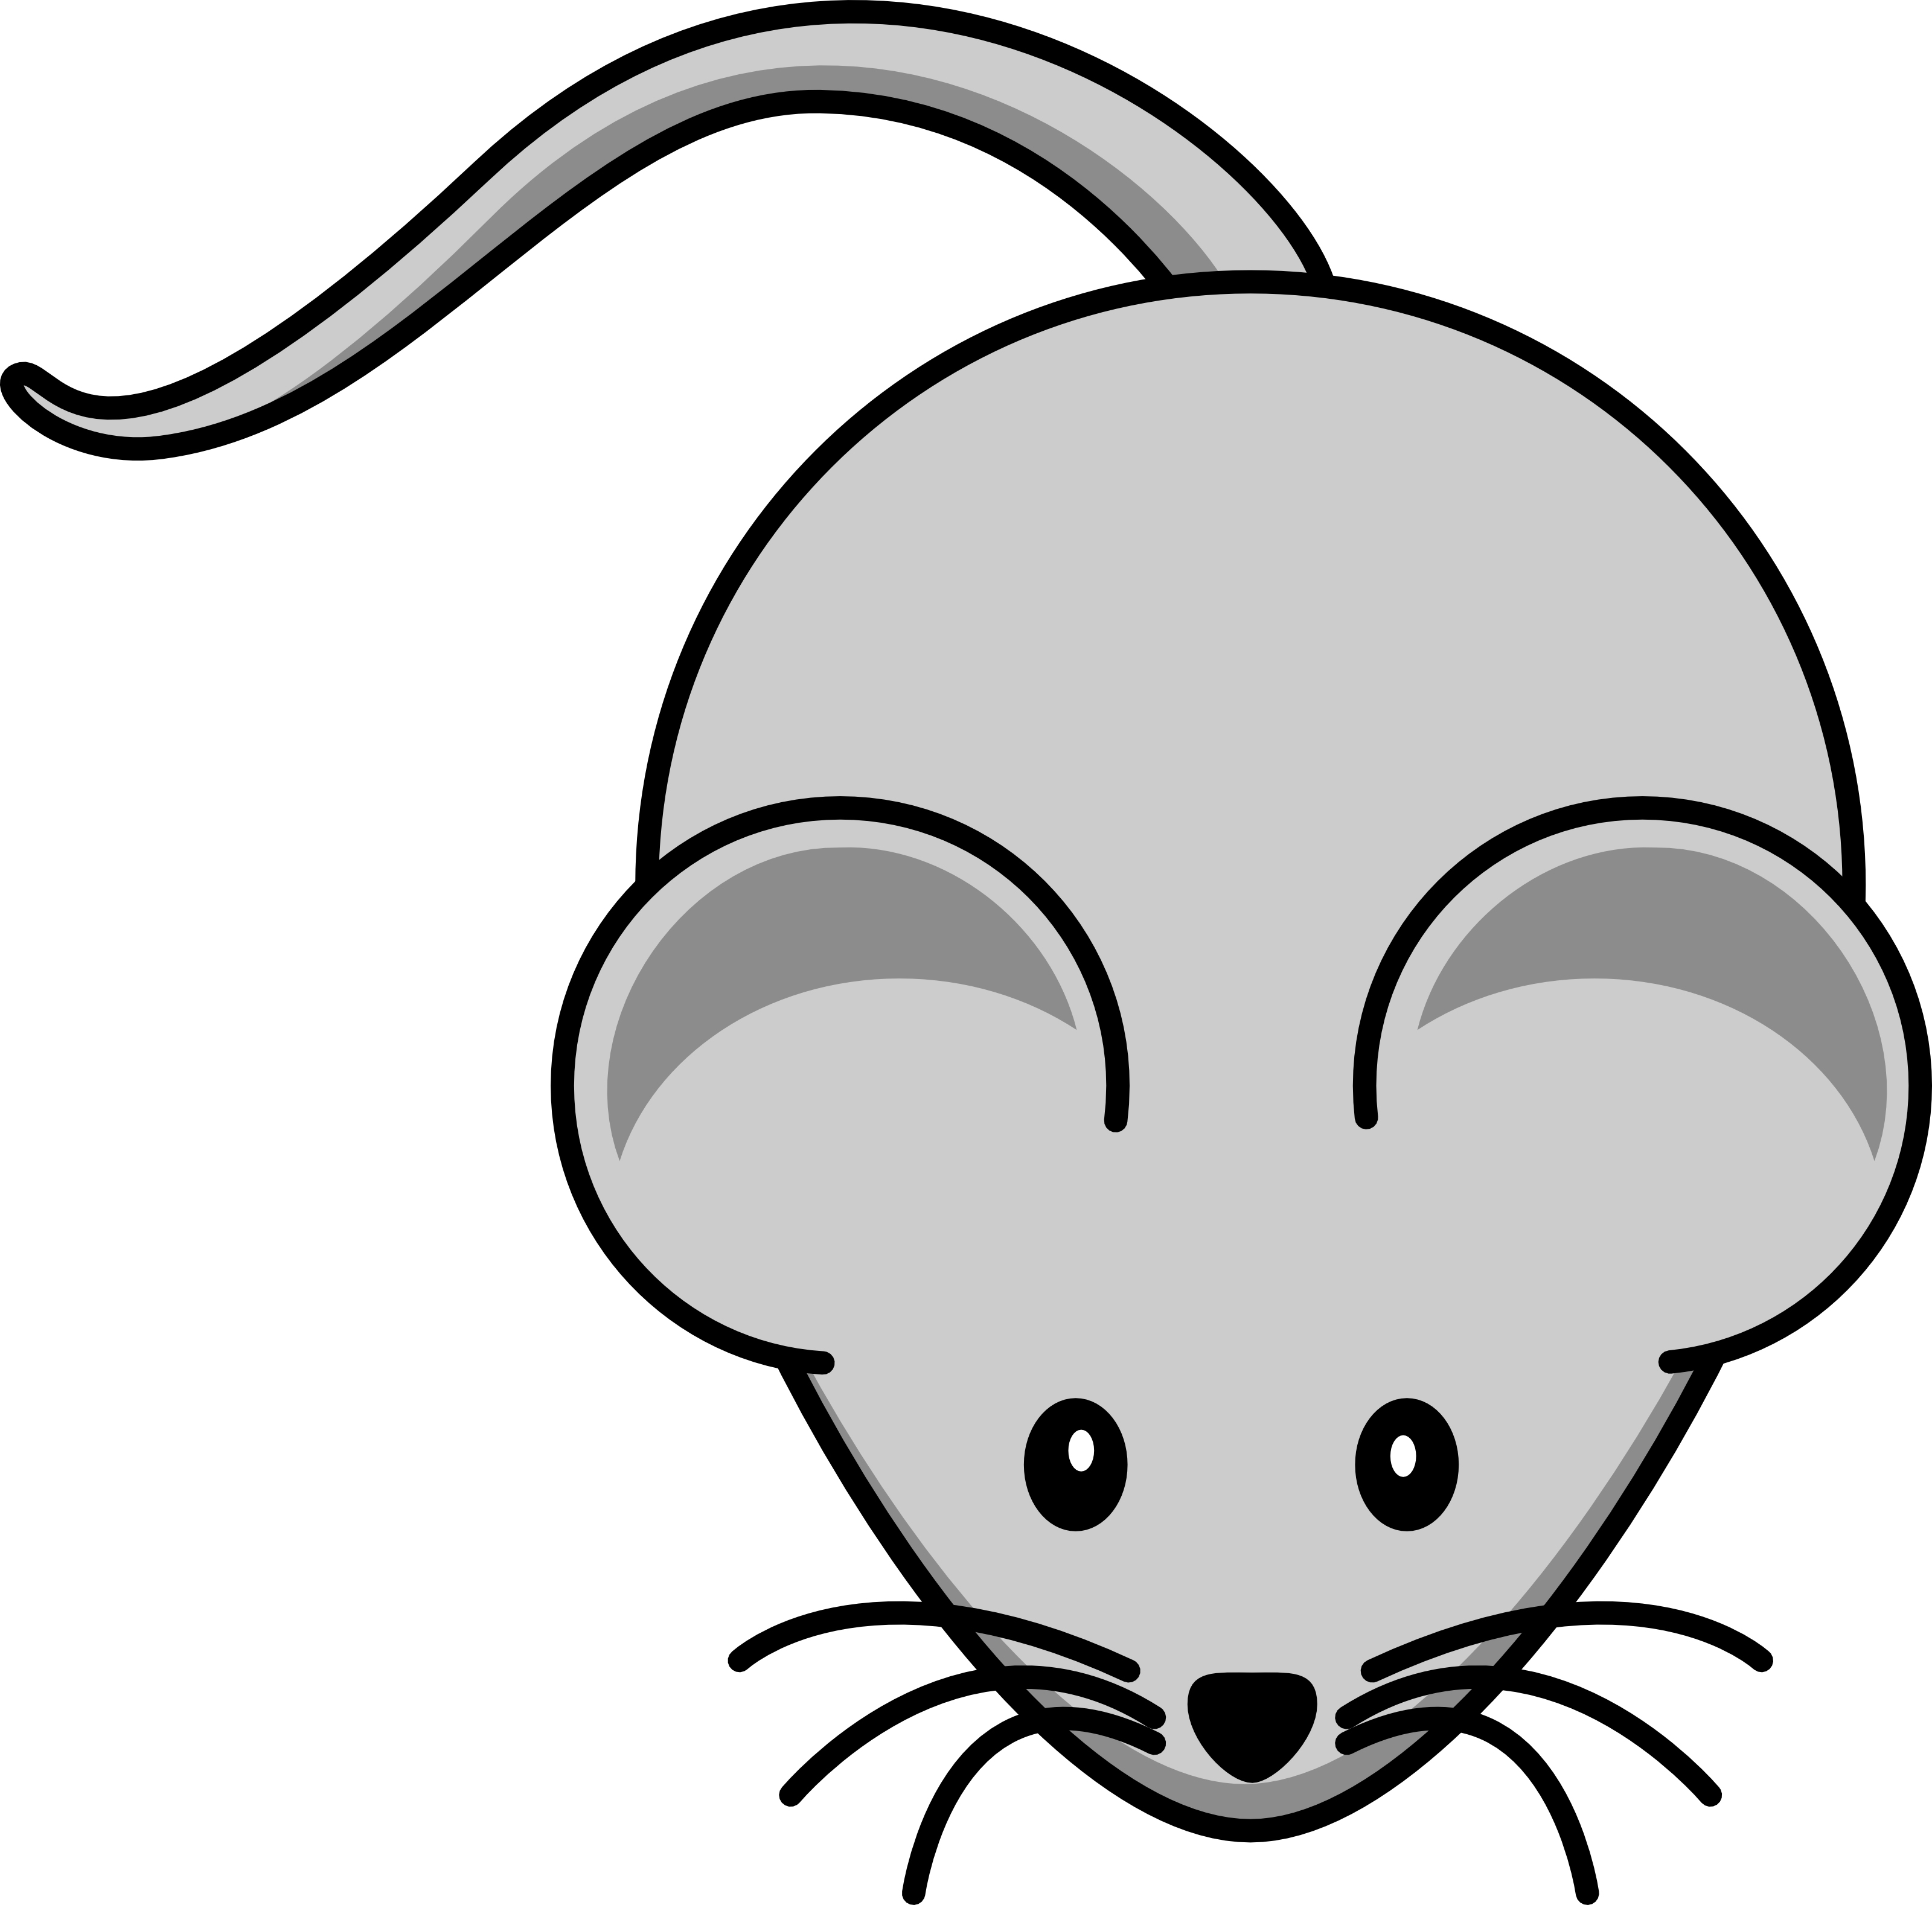 Mouse Clip Art Black And White   Clipart Panda   Free Clipart Images